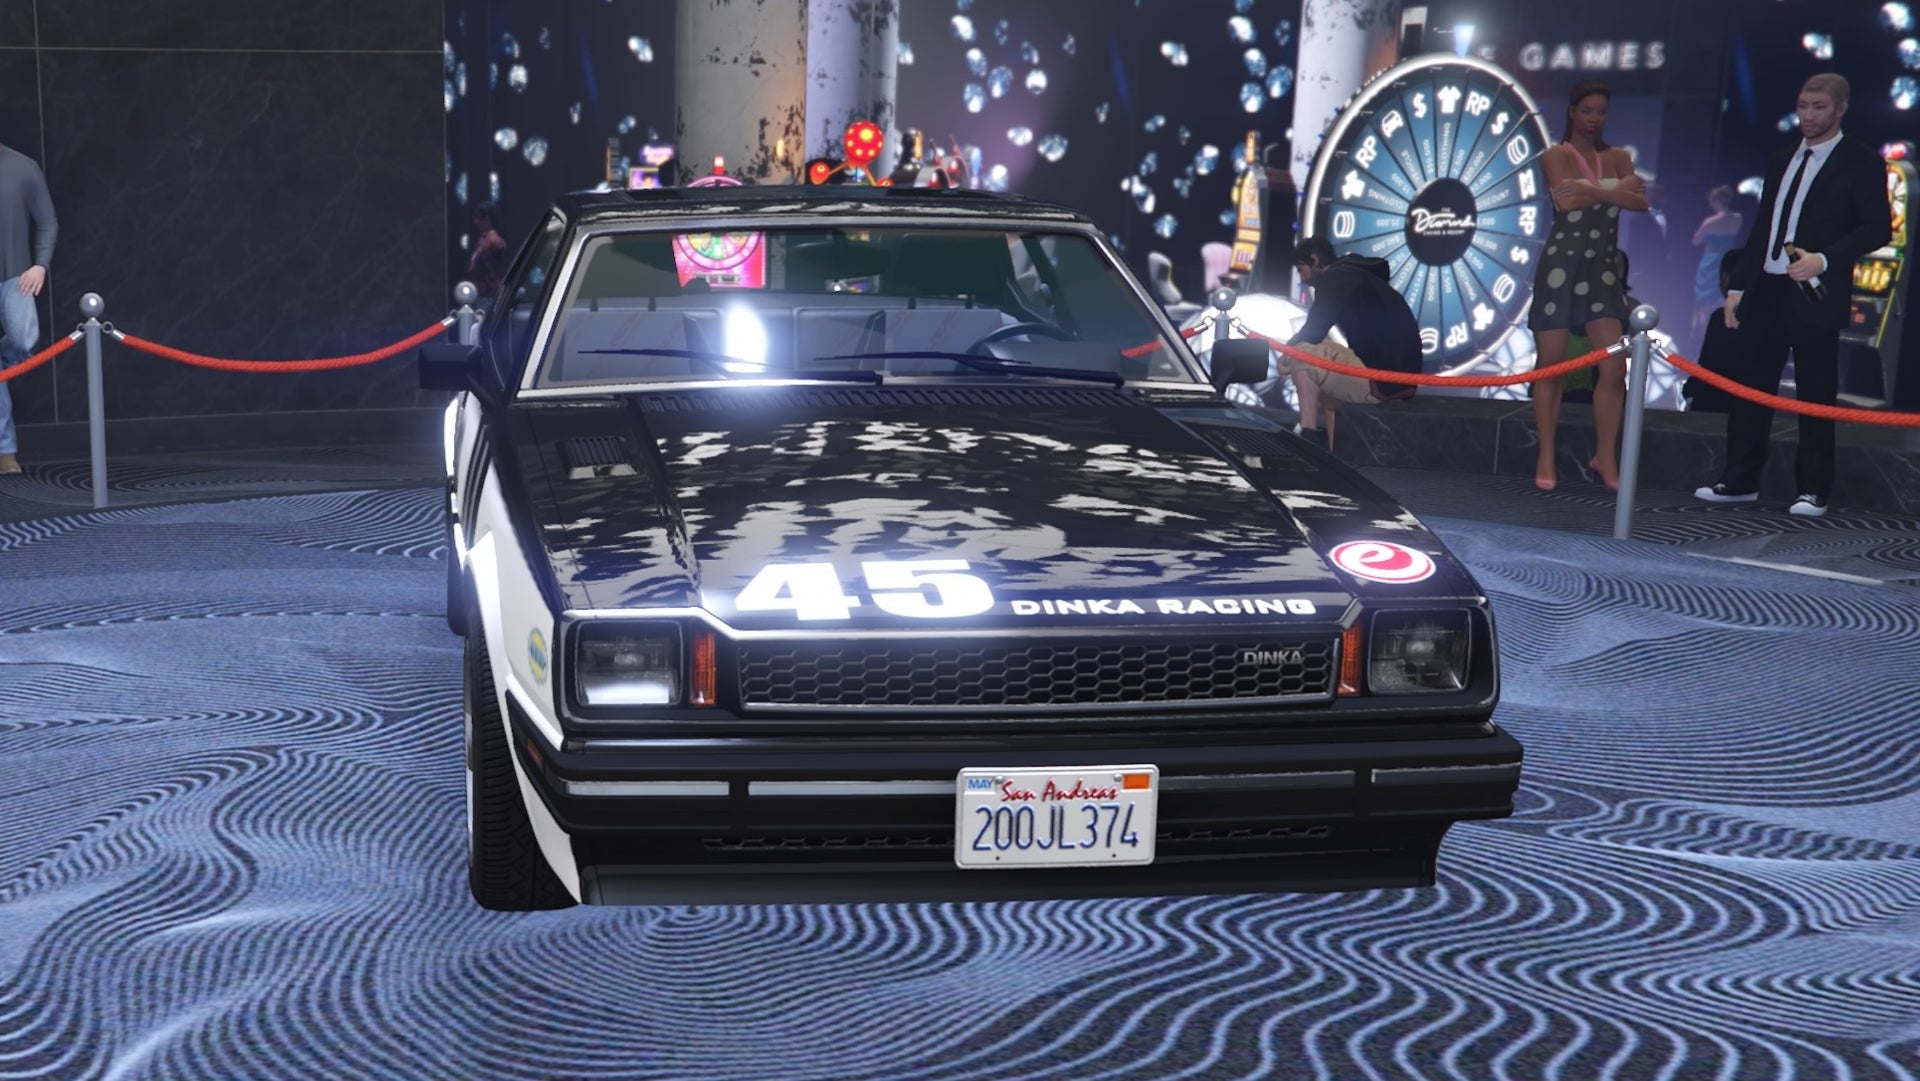 GTA Online, a front view of a black and white Dinka Postlude on the podium in the Diamond Casino.